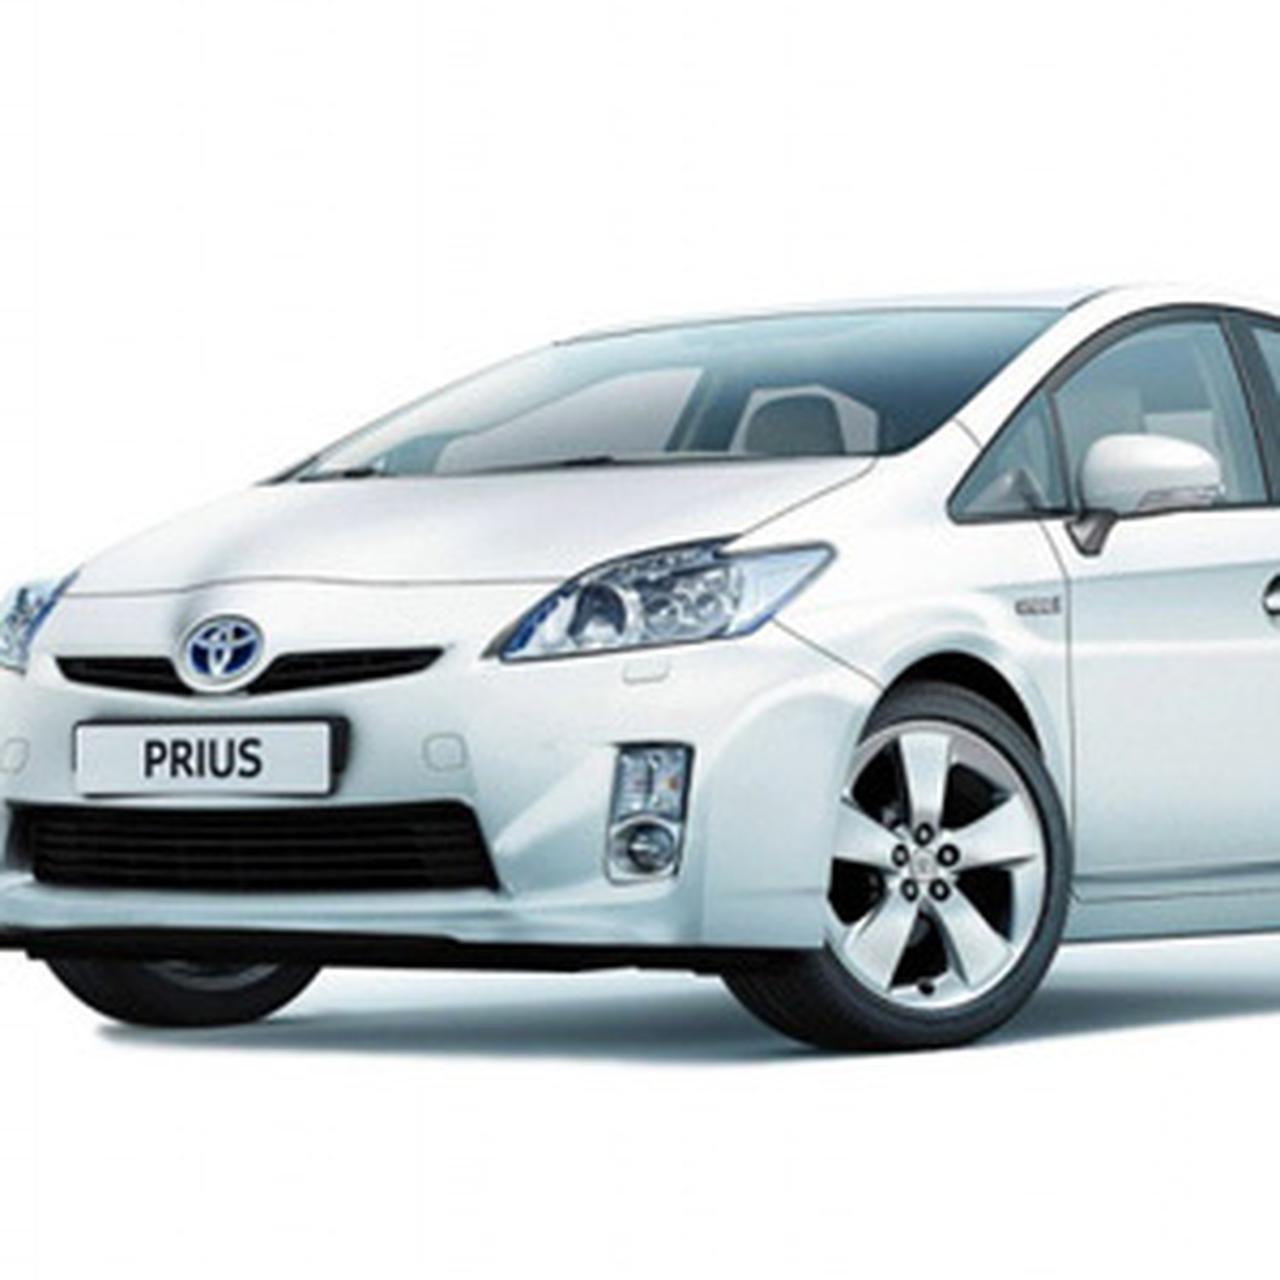 Toyota Prius 2006. Toyota Prius CVT. Toyota Prius III xw30 Android.